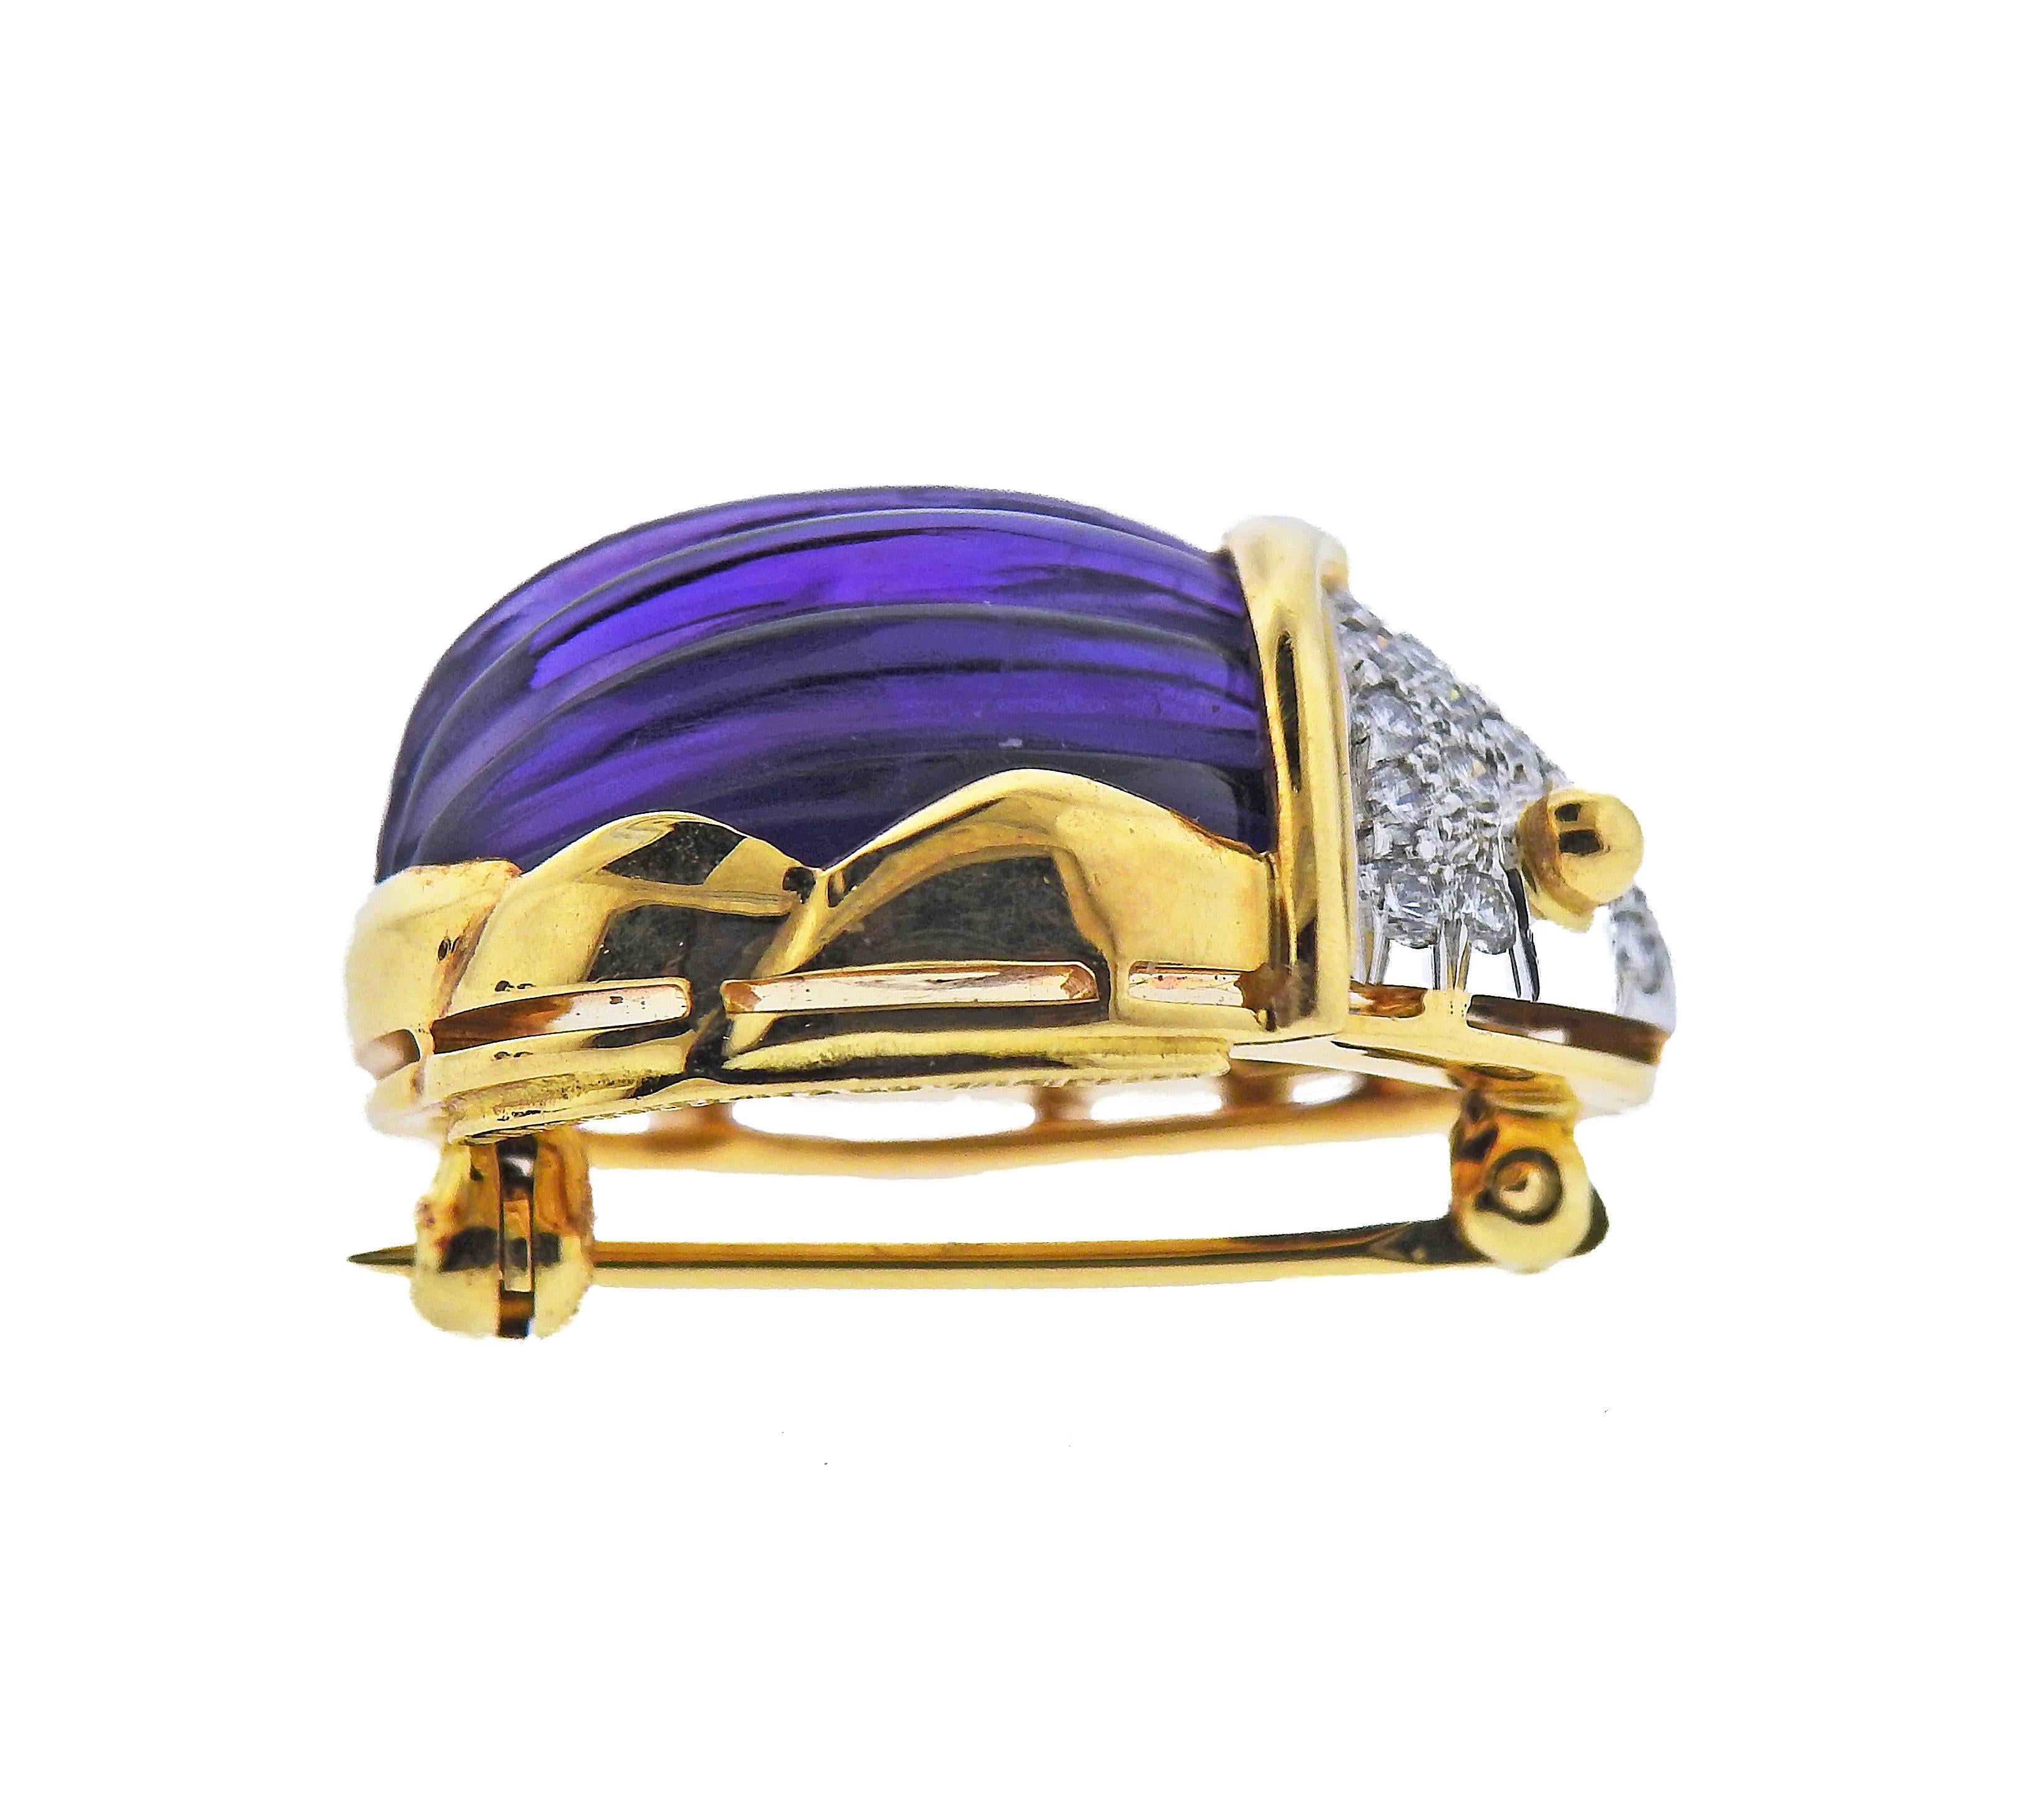 Tiffany & Co. Carved Amethyst Diamond Gold Beetle Earrings Brooch Set In Excellent Condition For Sale In New York, NY